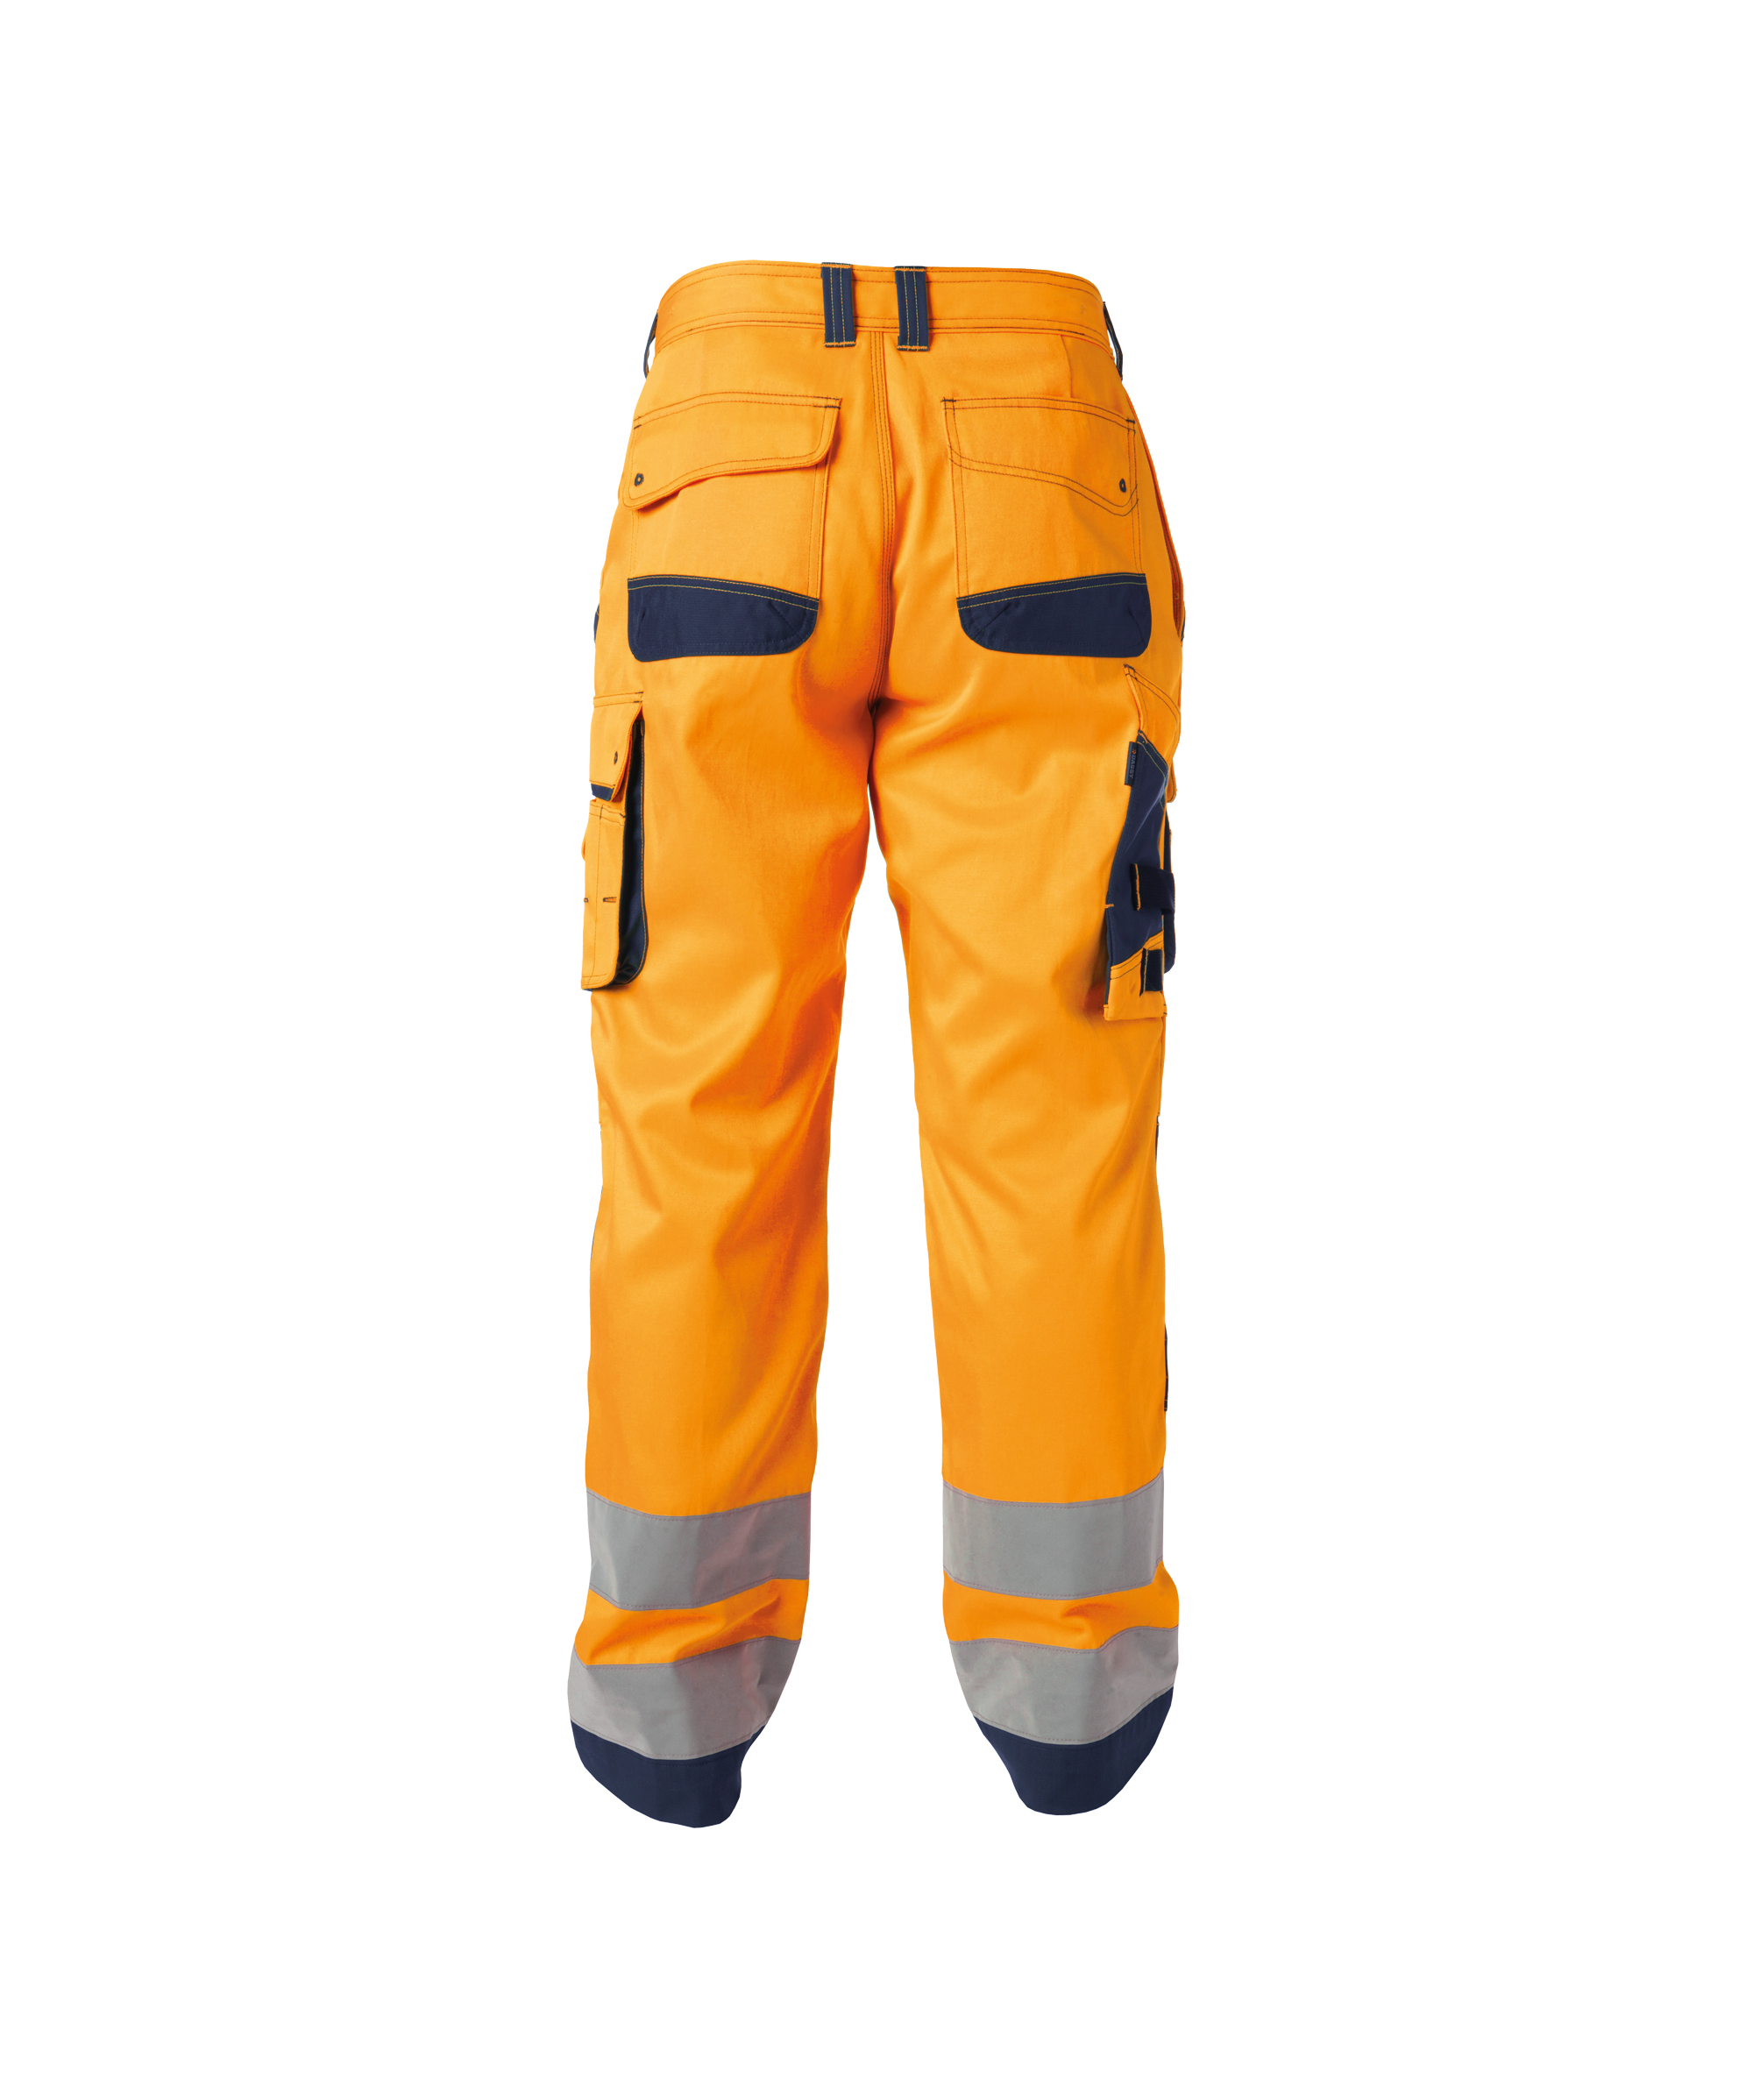 chicago_high-visibility-work-trousers-with-knee-pockets_fluo-orange-navy_back.jpg